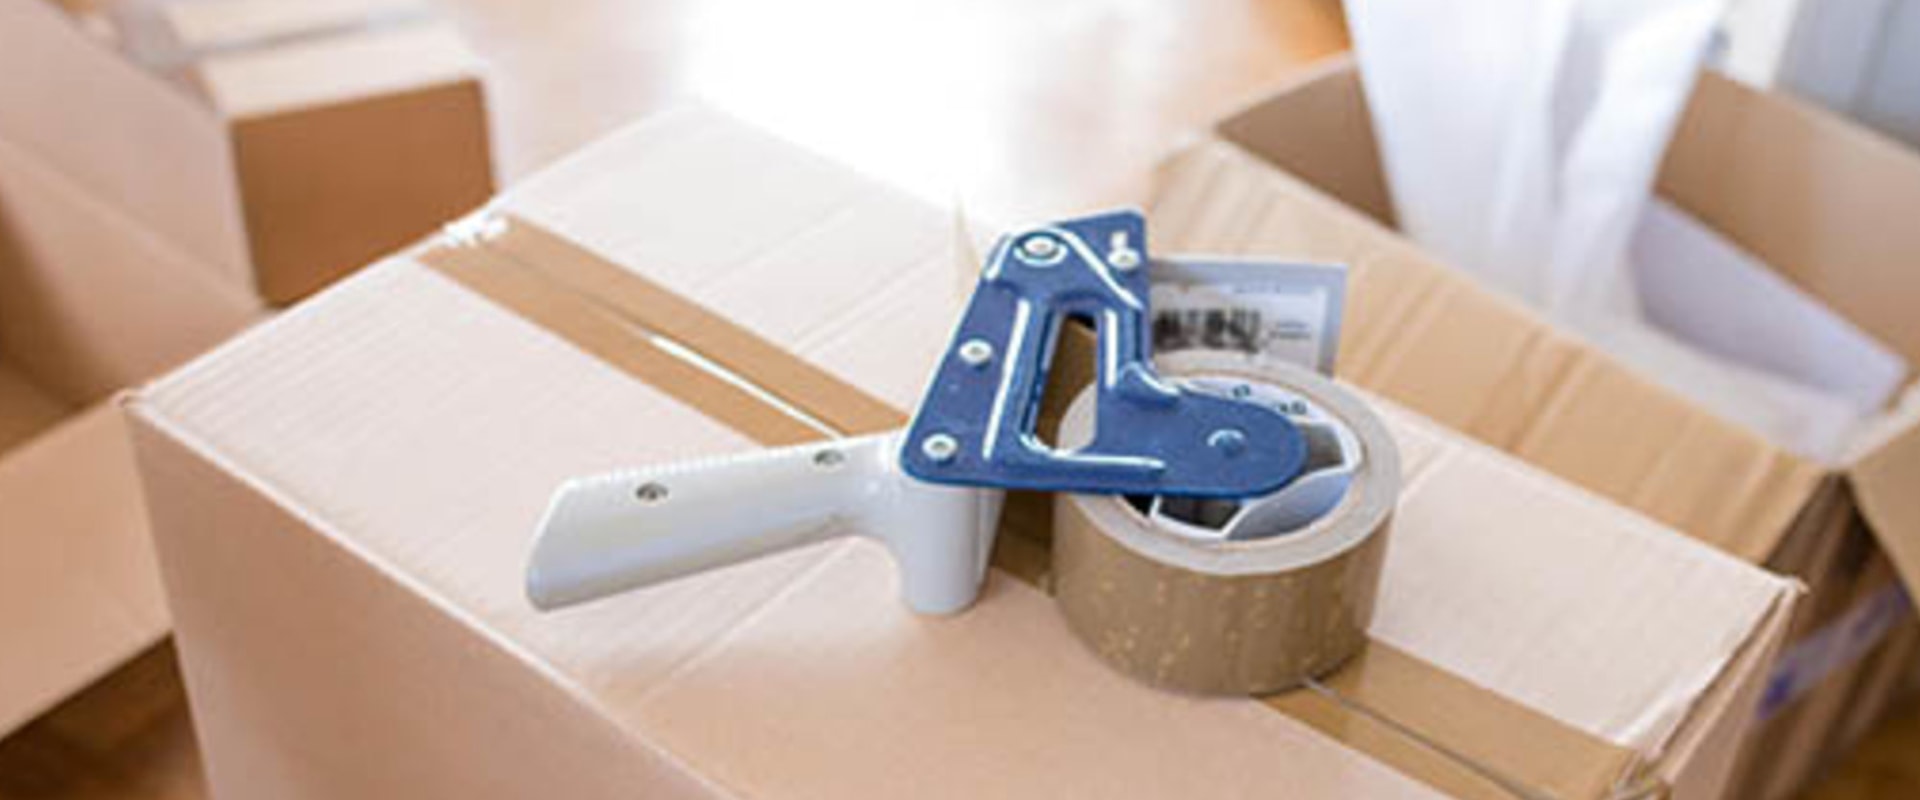 What are the best ways to find affordable packing materials for a house move?